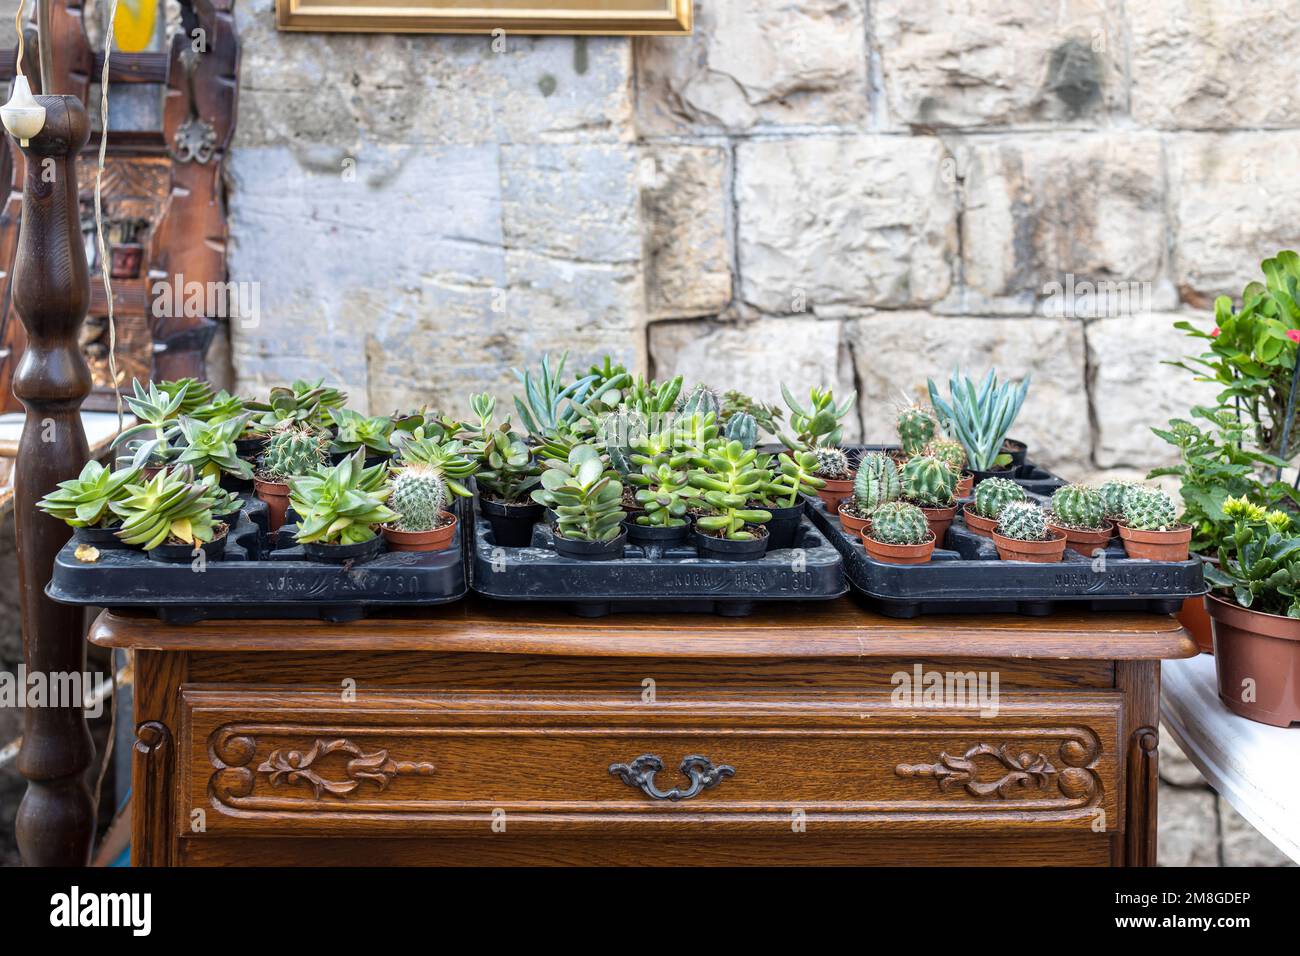 Various types of succulents in small pots on a wooden antique table with bas-reliefs against a stone wall as an interior decoration Stock Photo